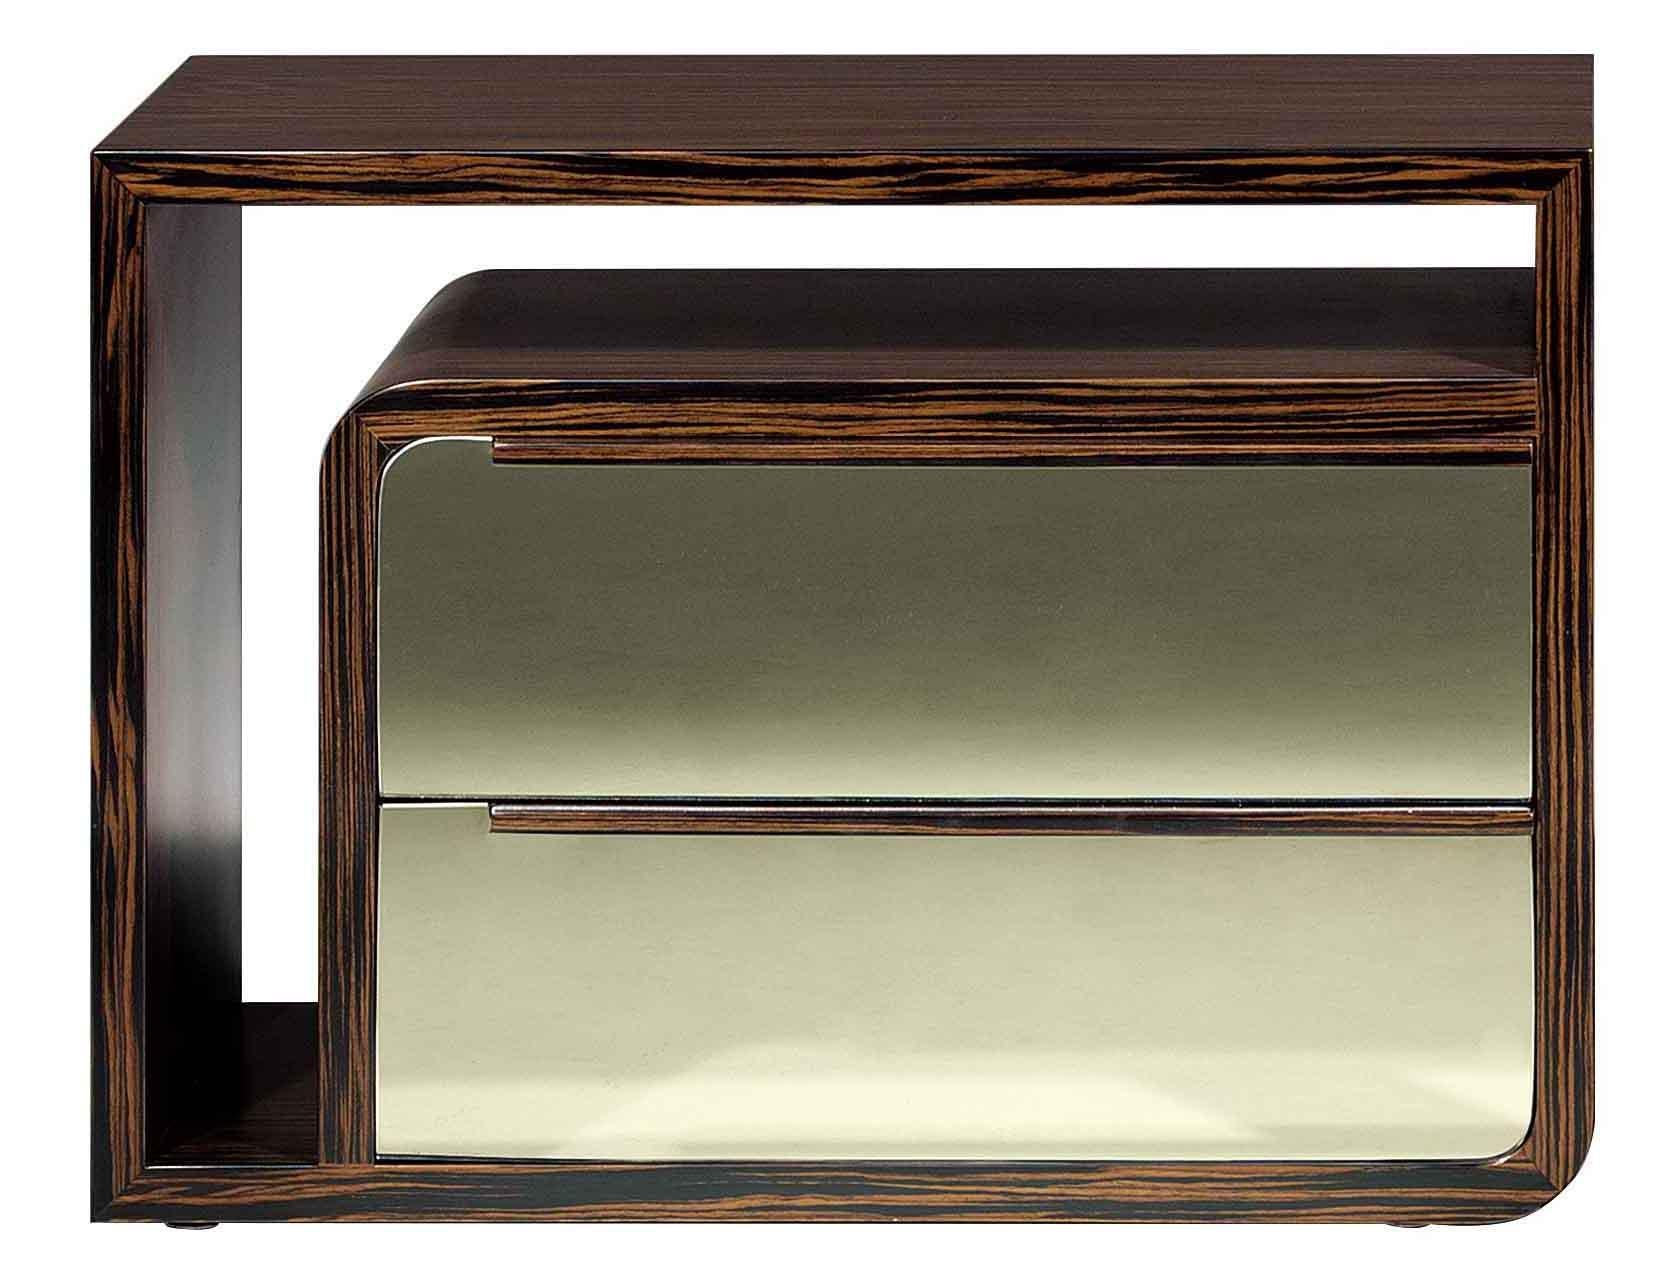 Rose bedside or support table in ebony with two mirrored drawers (regular/ grey, gold /bronze).

Bespoke / Customizable
Identical shapes with different sizes and finishings.
All RAL colors available. (Mate / Half Gloss / Gloss)
    